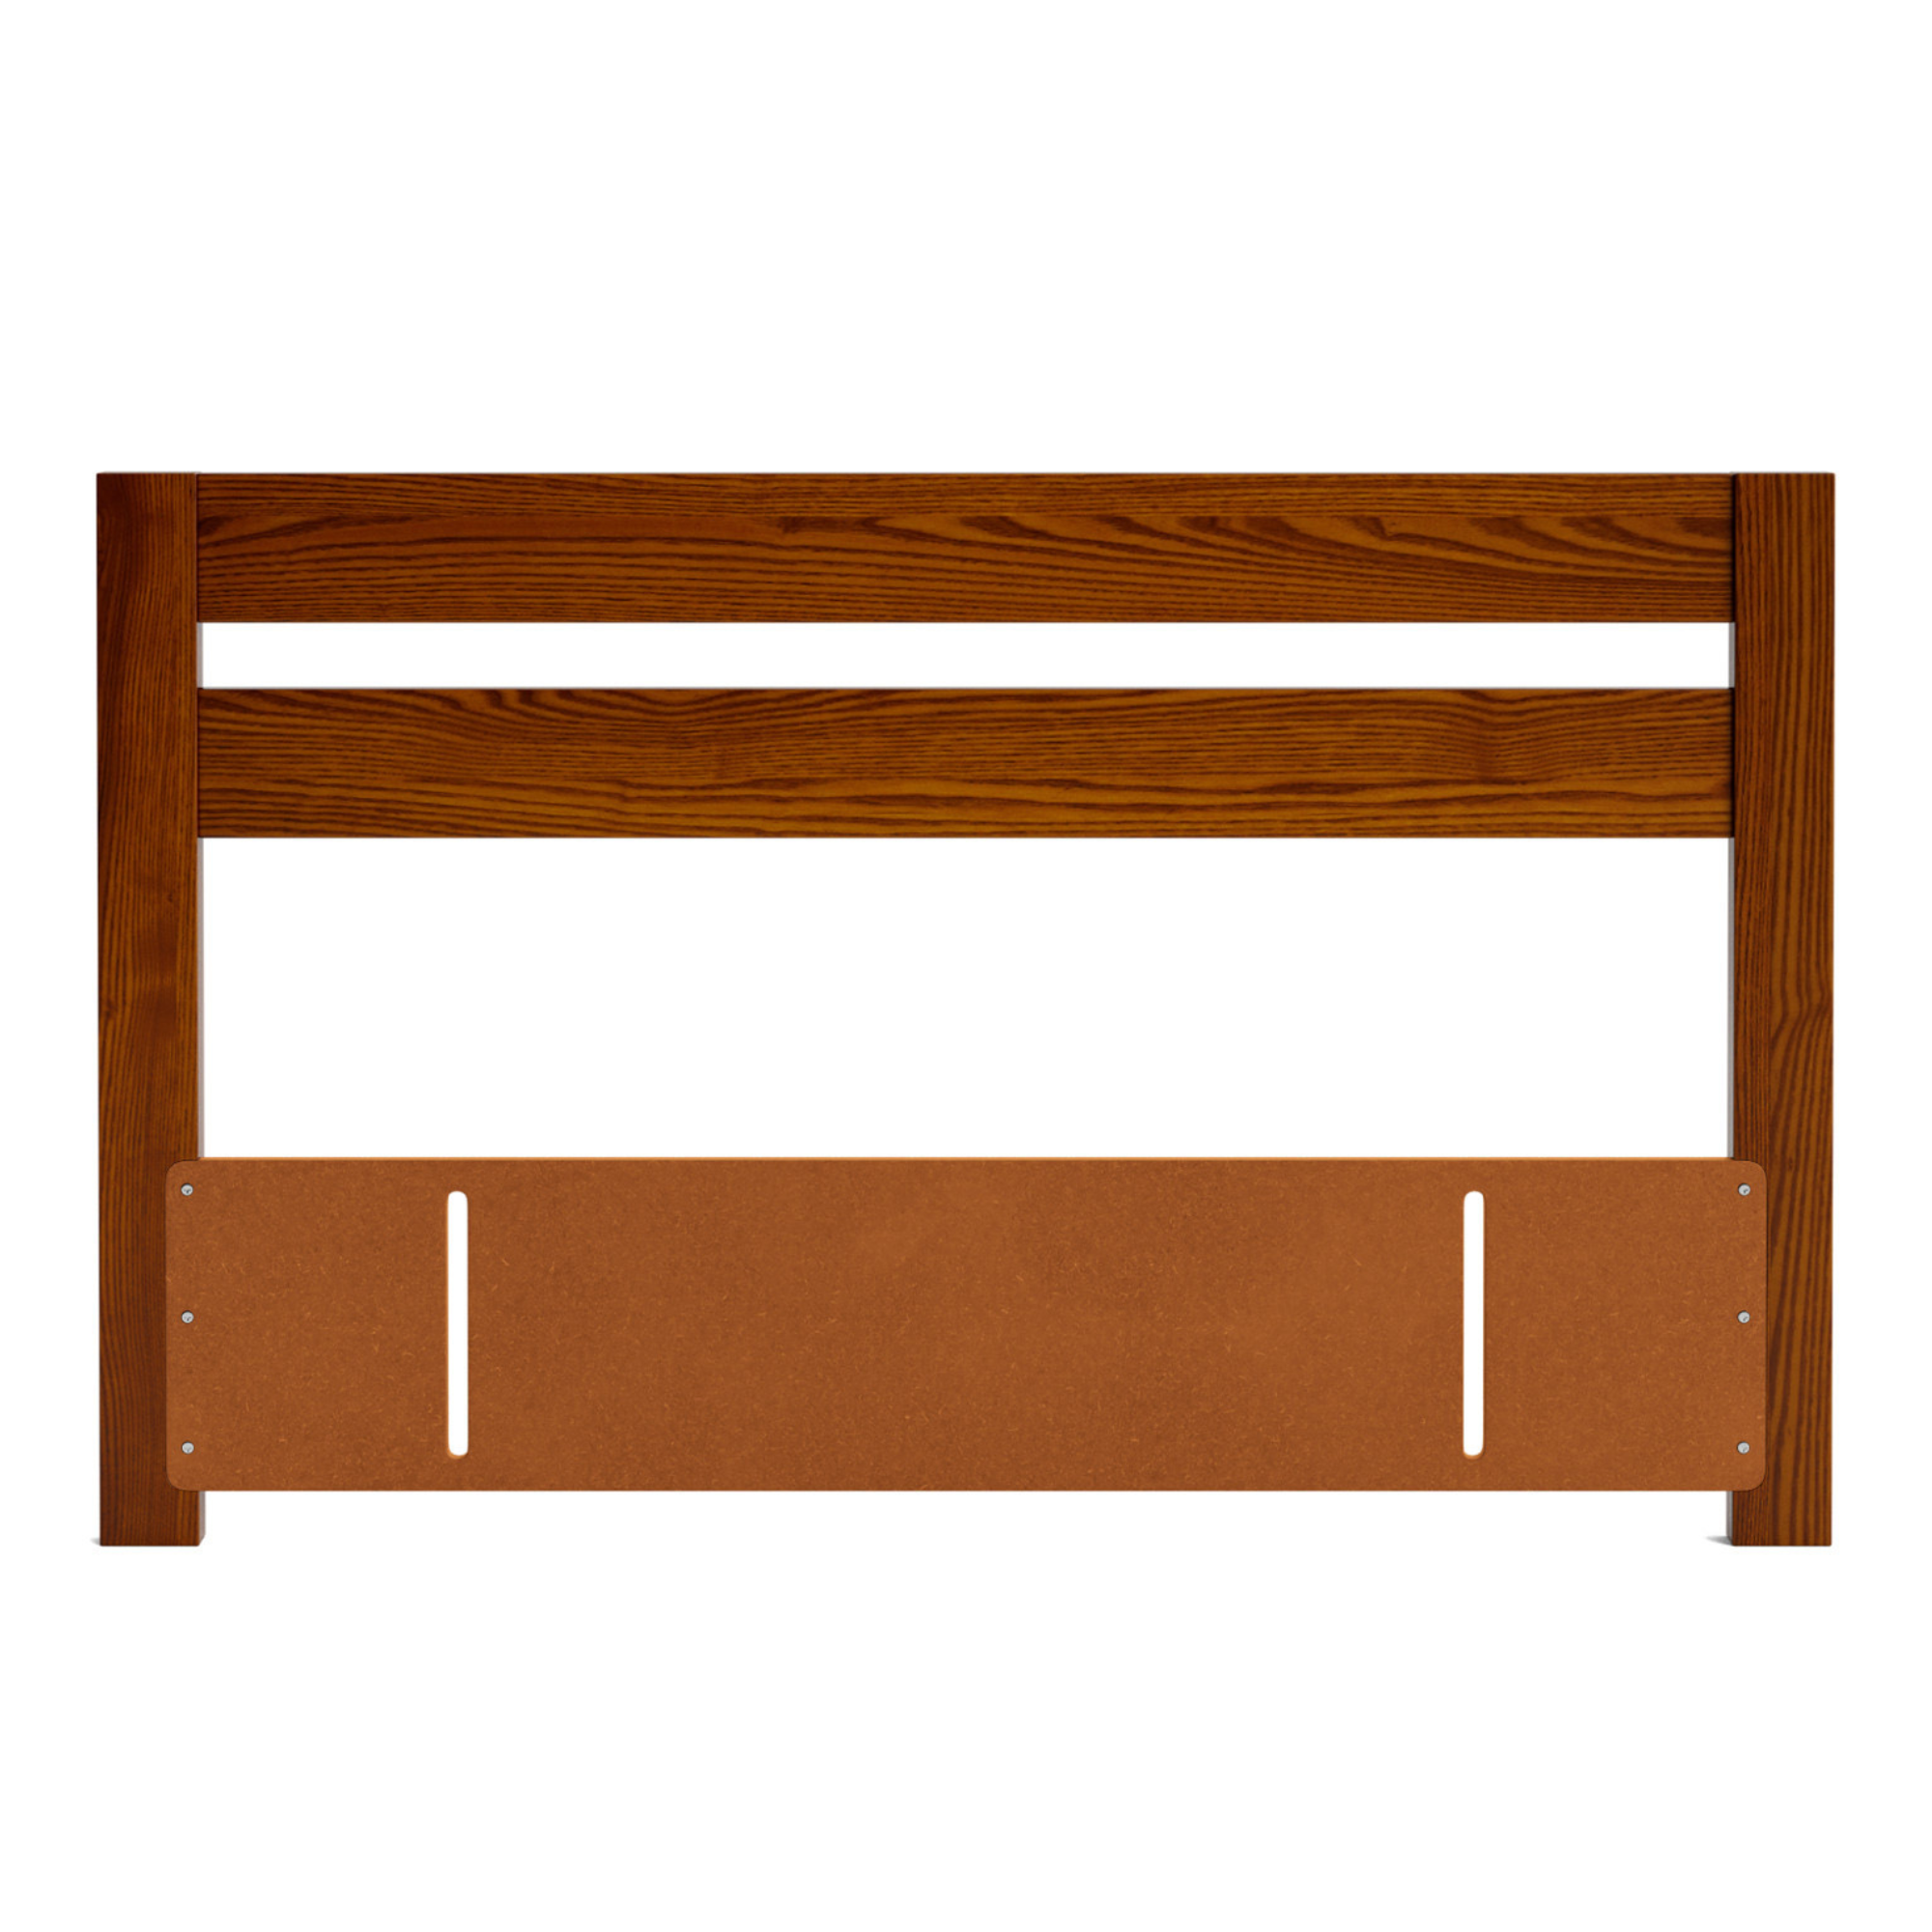 OMOTO HEADBOARD | PINE OR AMERICAN ASH | ALL SIZES | NZ MADE